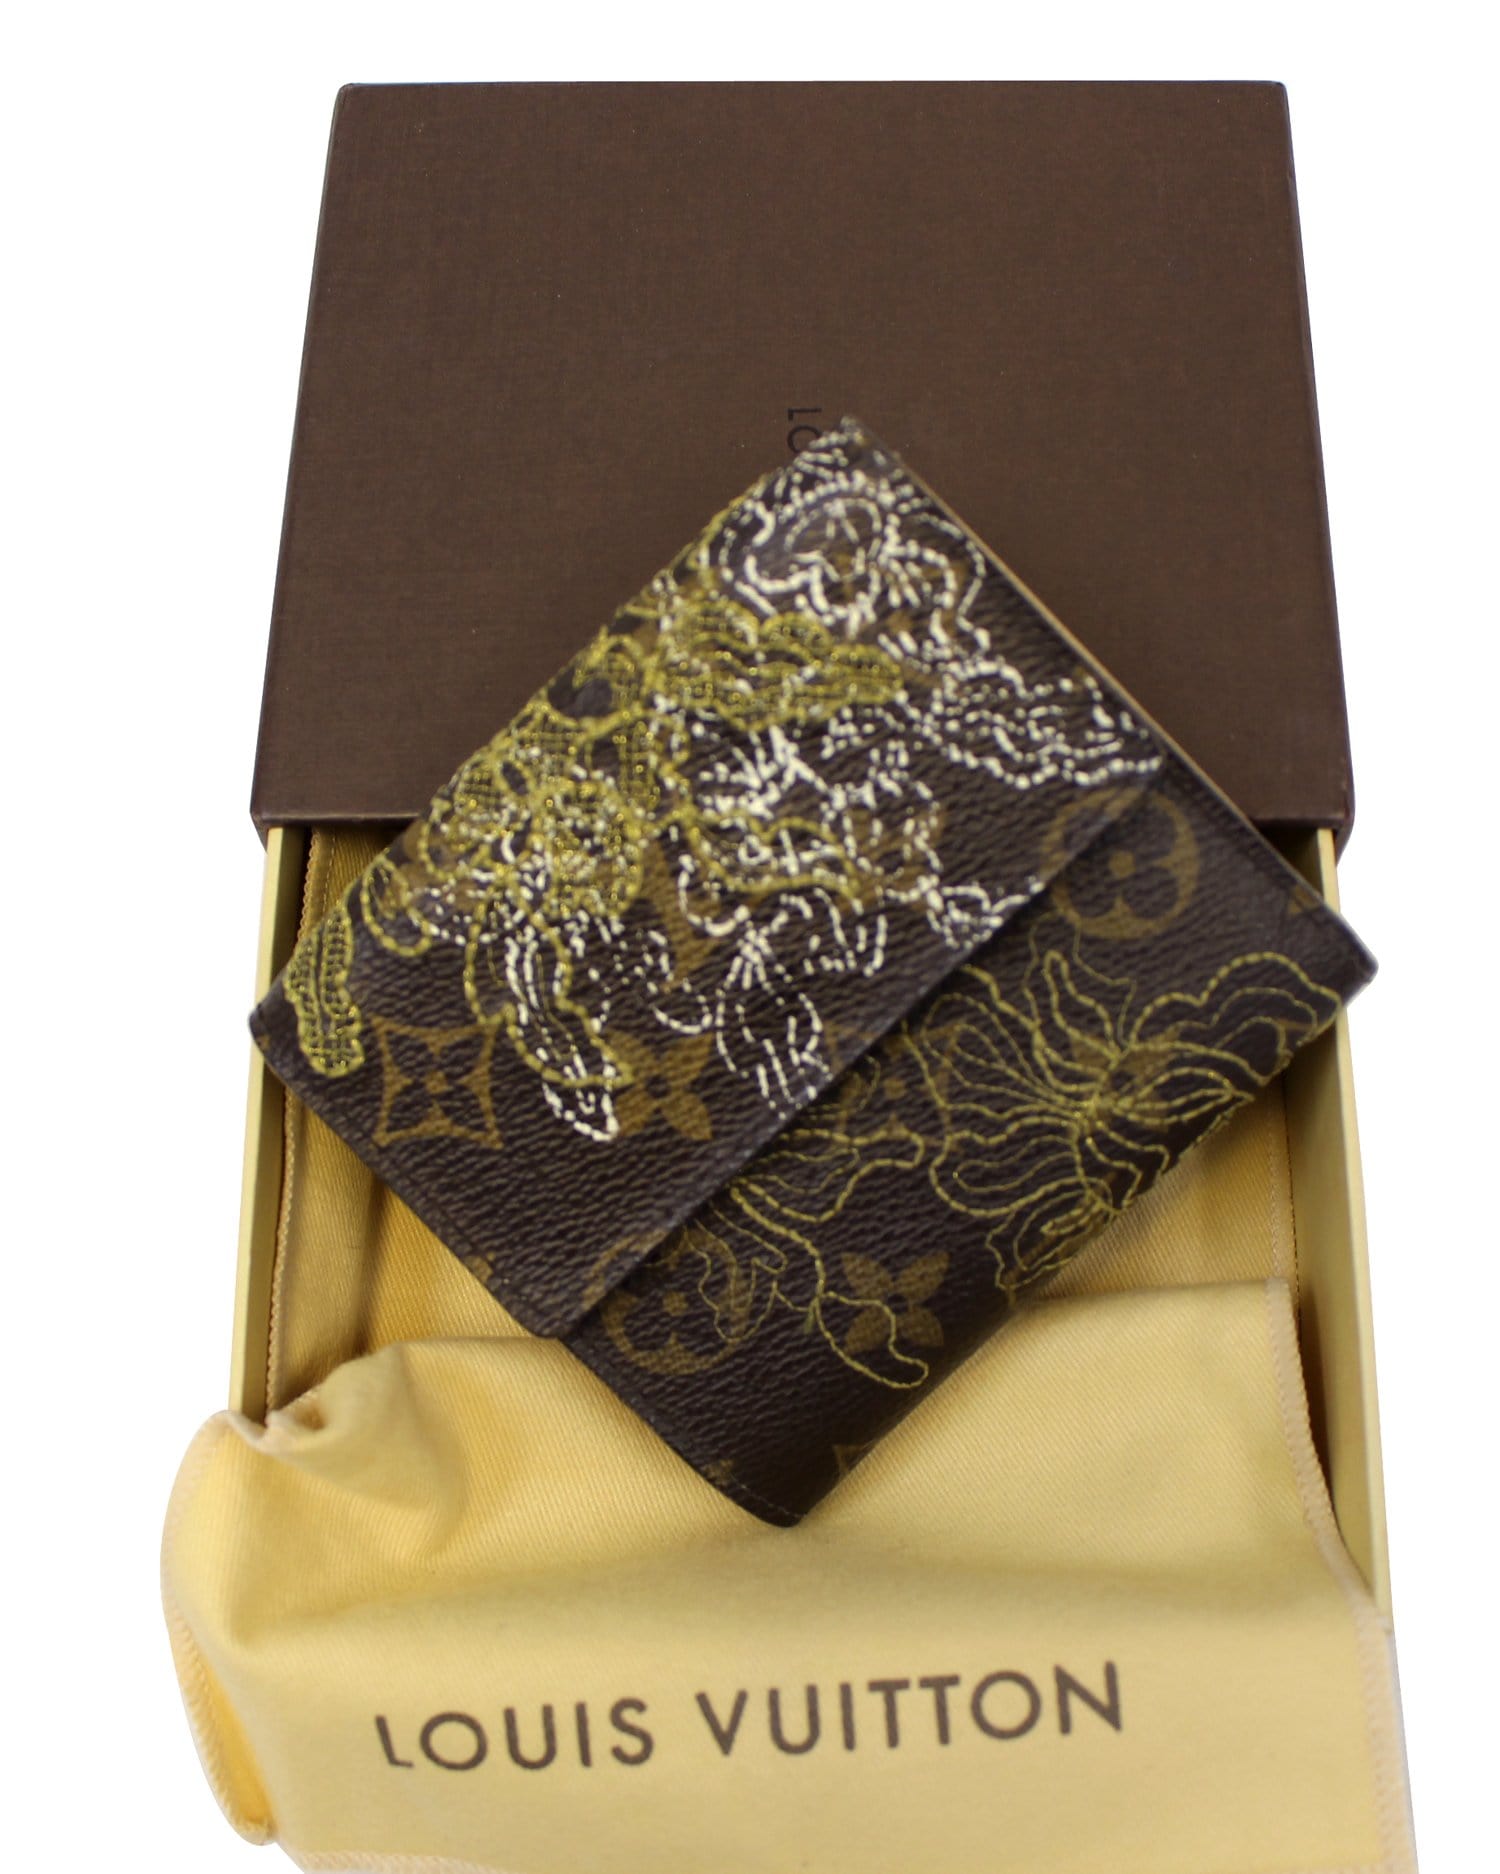 Louis vuitton wallet With paper bag - SOLID GOLD Jewelry